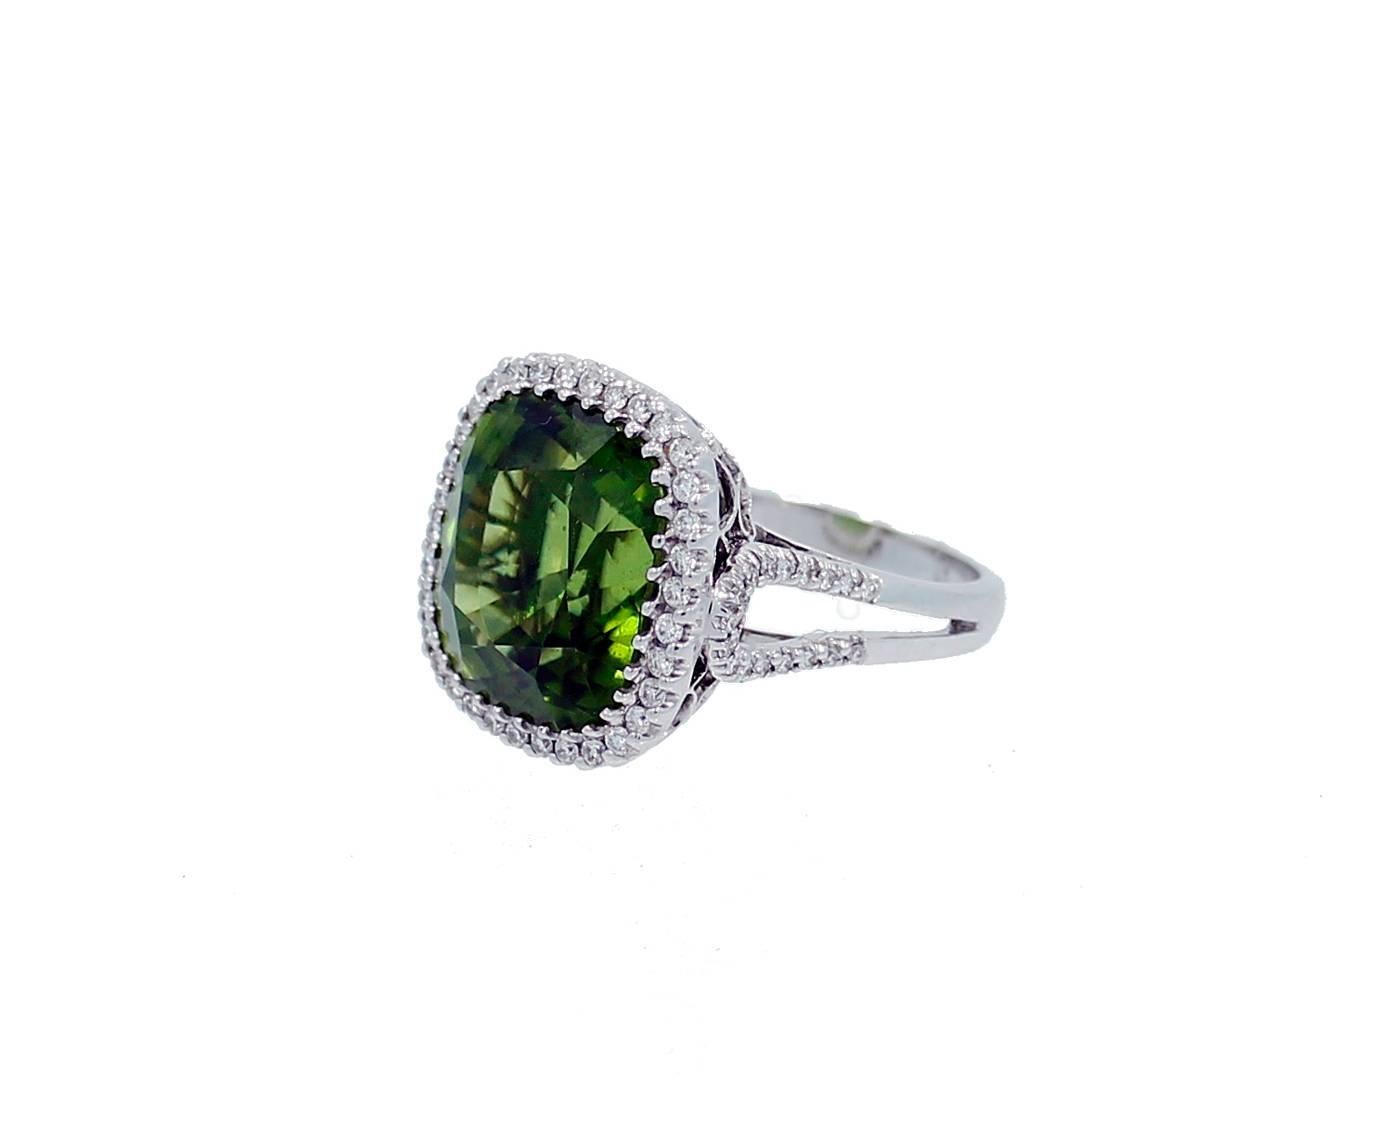 18K White Gold Ring with Center Burmese Peridot which weighs 16.71ct and 68 Round Brilliant Cut Diamonds weighing a total of .58 carat's G-H in Color and VS2-SI1 in Clarity. The ring is a size 7. Can be sized.